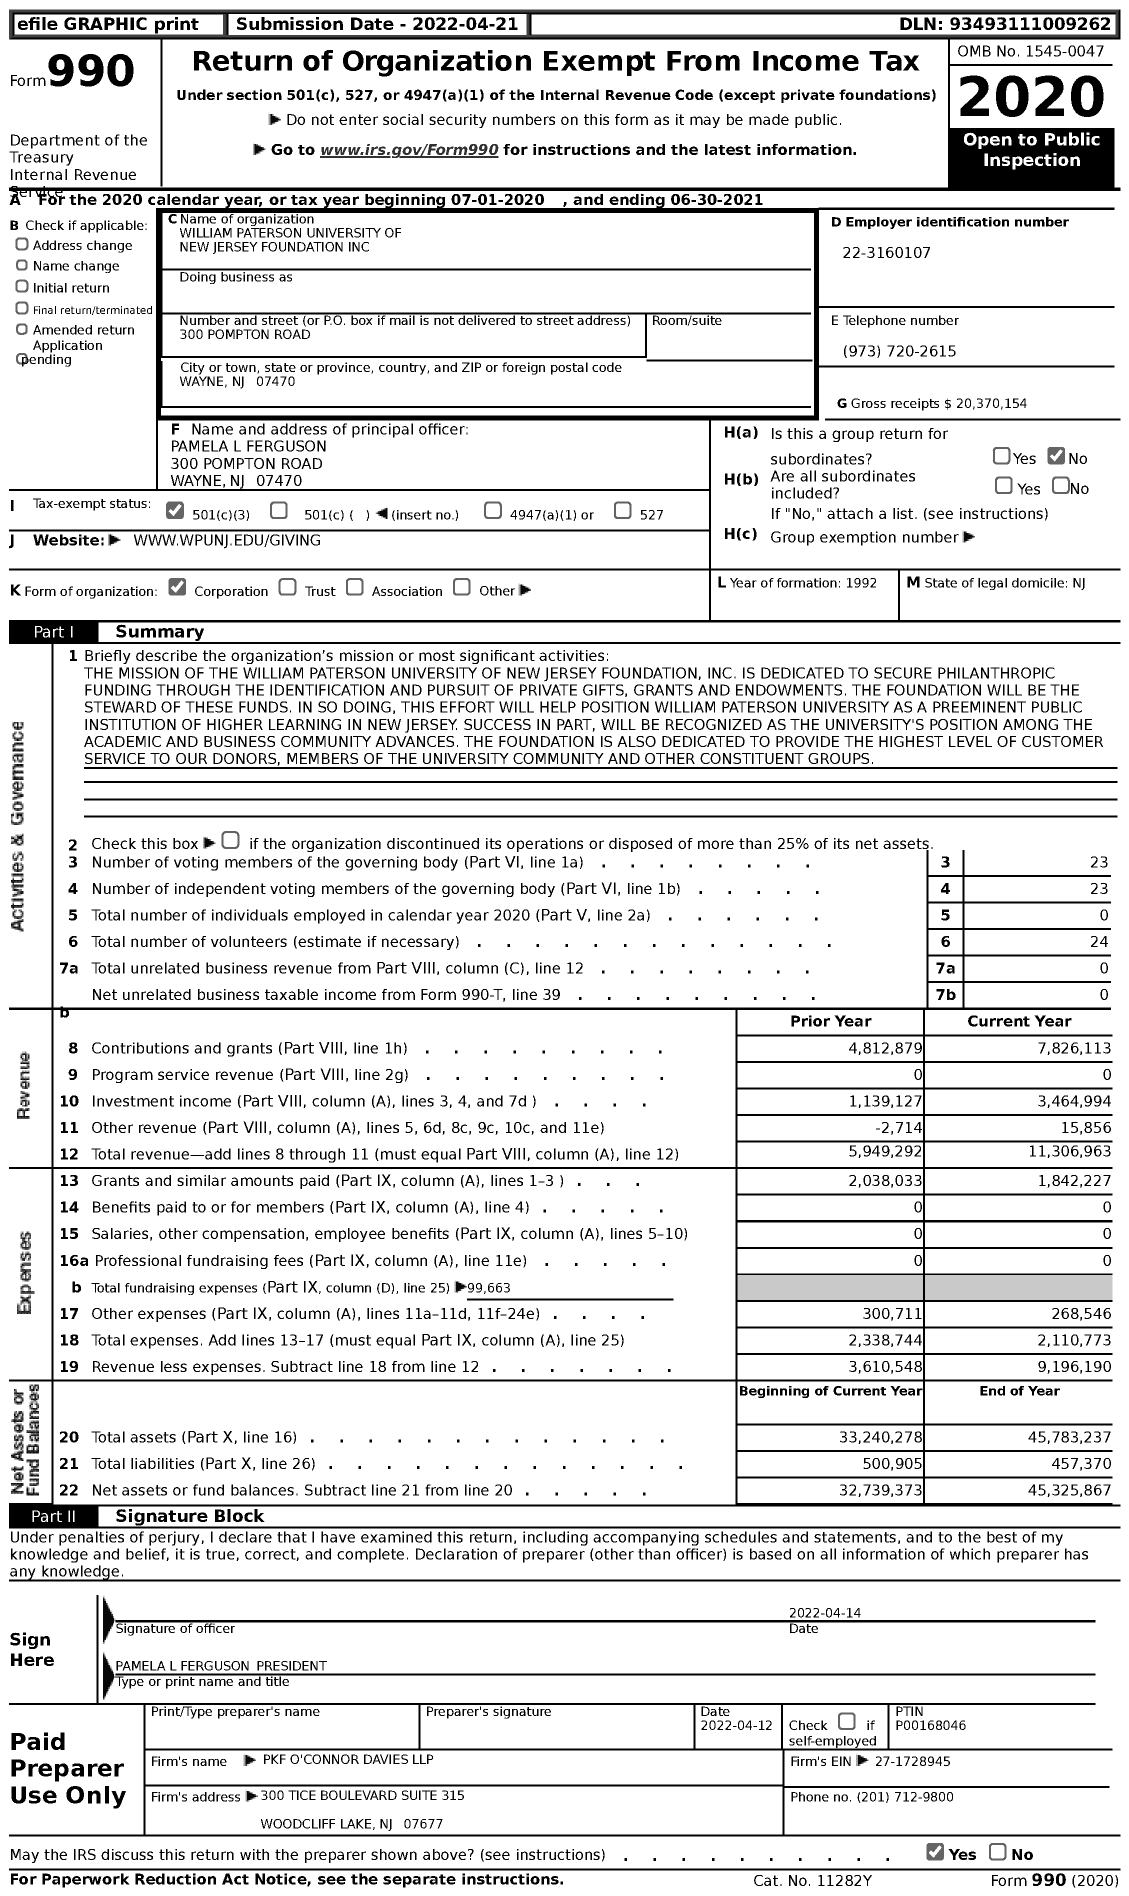 Image of first page of 2020 Form 990 for The William Paterson University of New Jersey (WPUNJ)